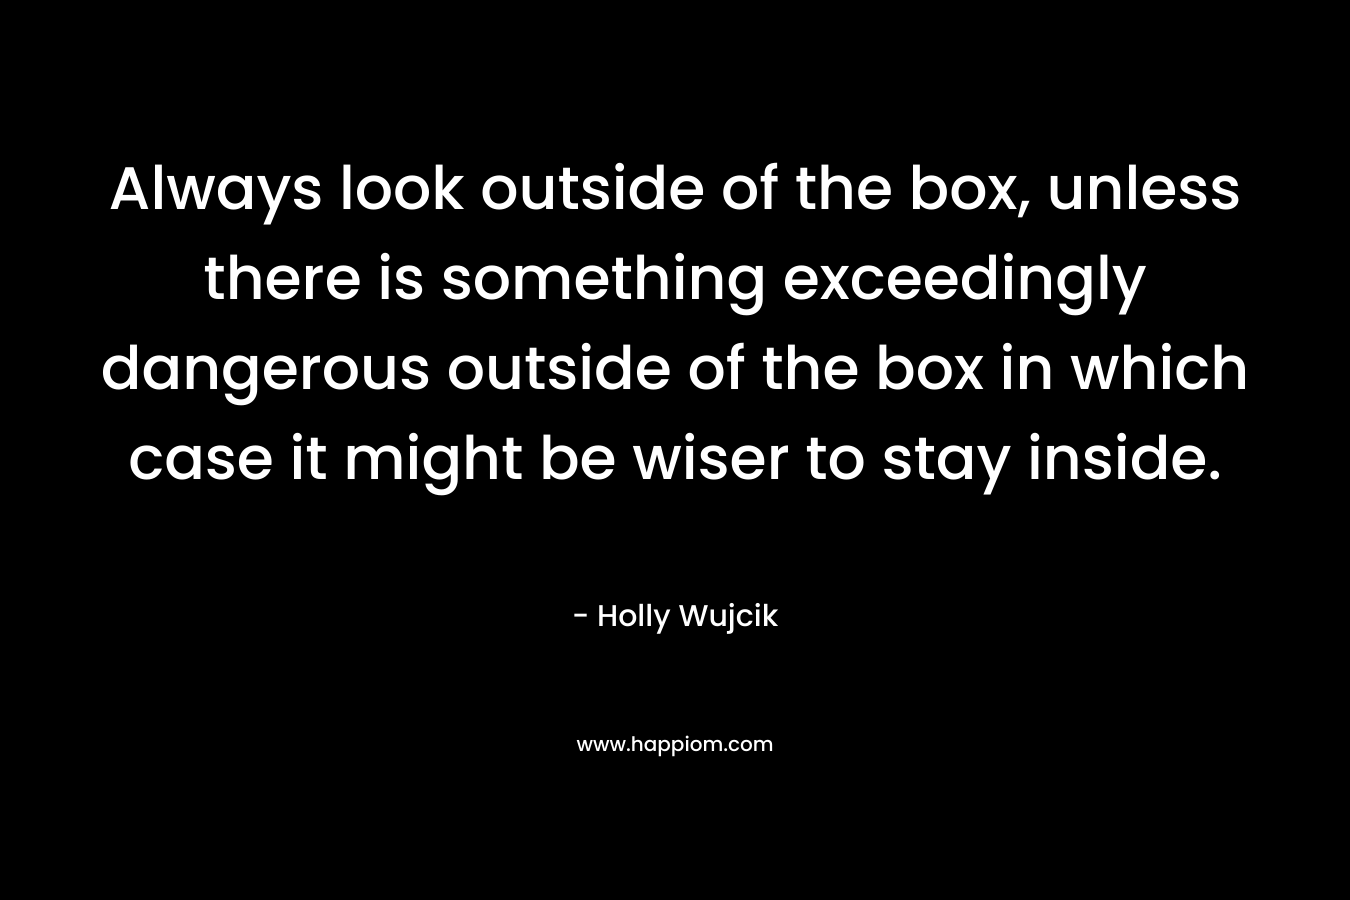 Always look outside of the box, unless there is something exceedingly dangerous outside of the box in which case it might be wiser to stay inside.